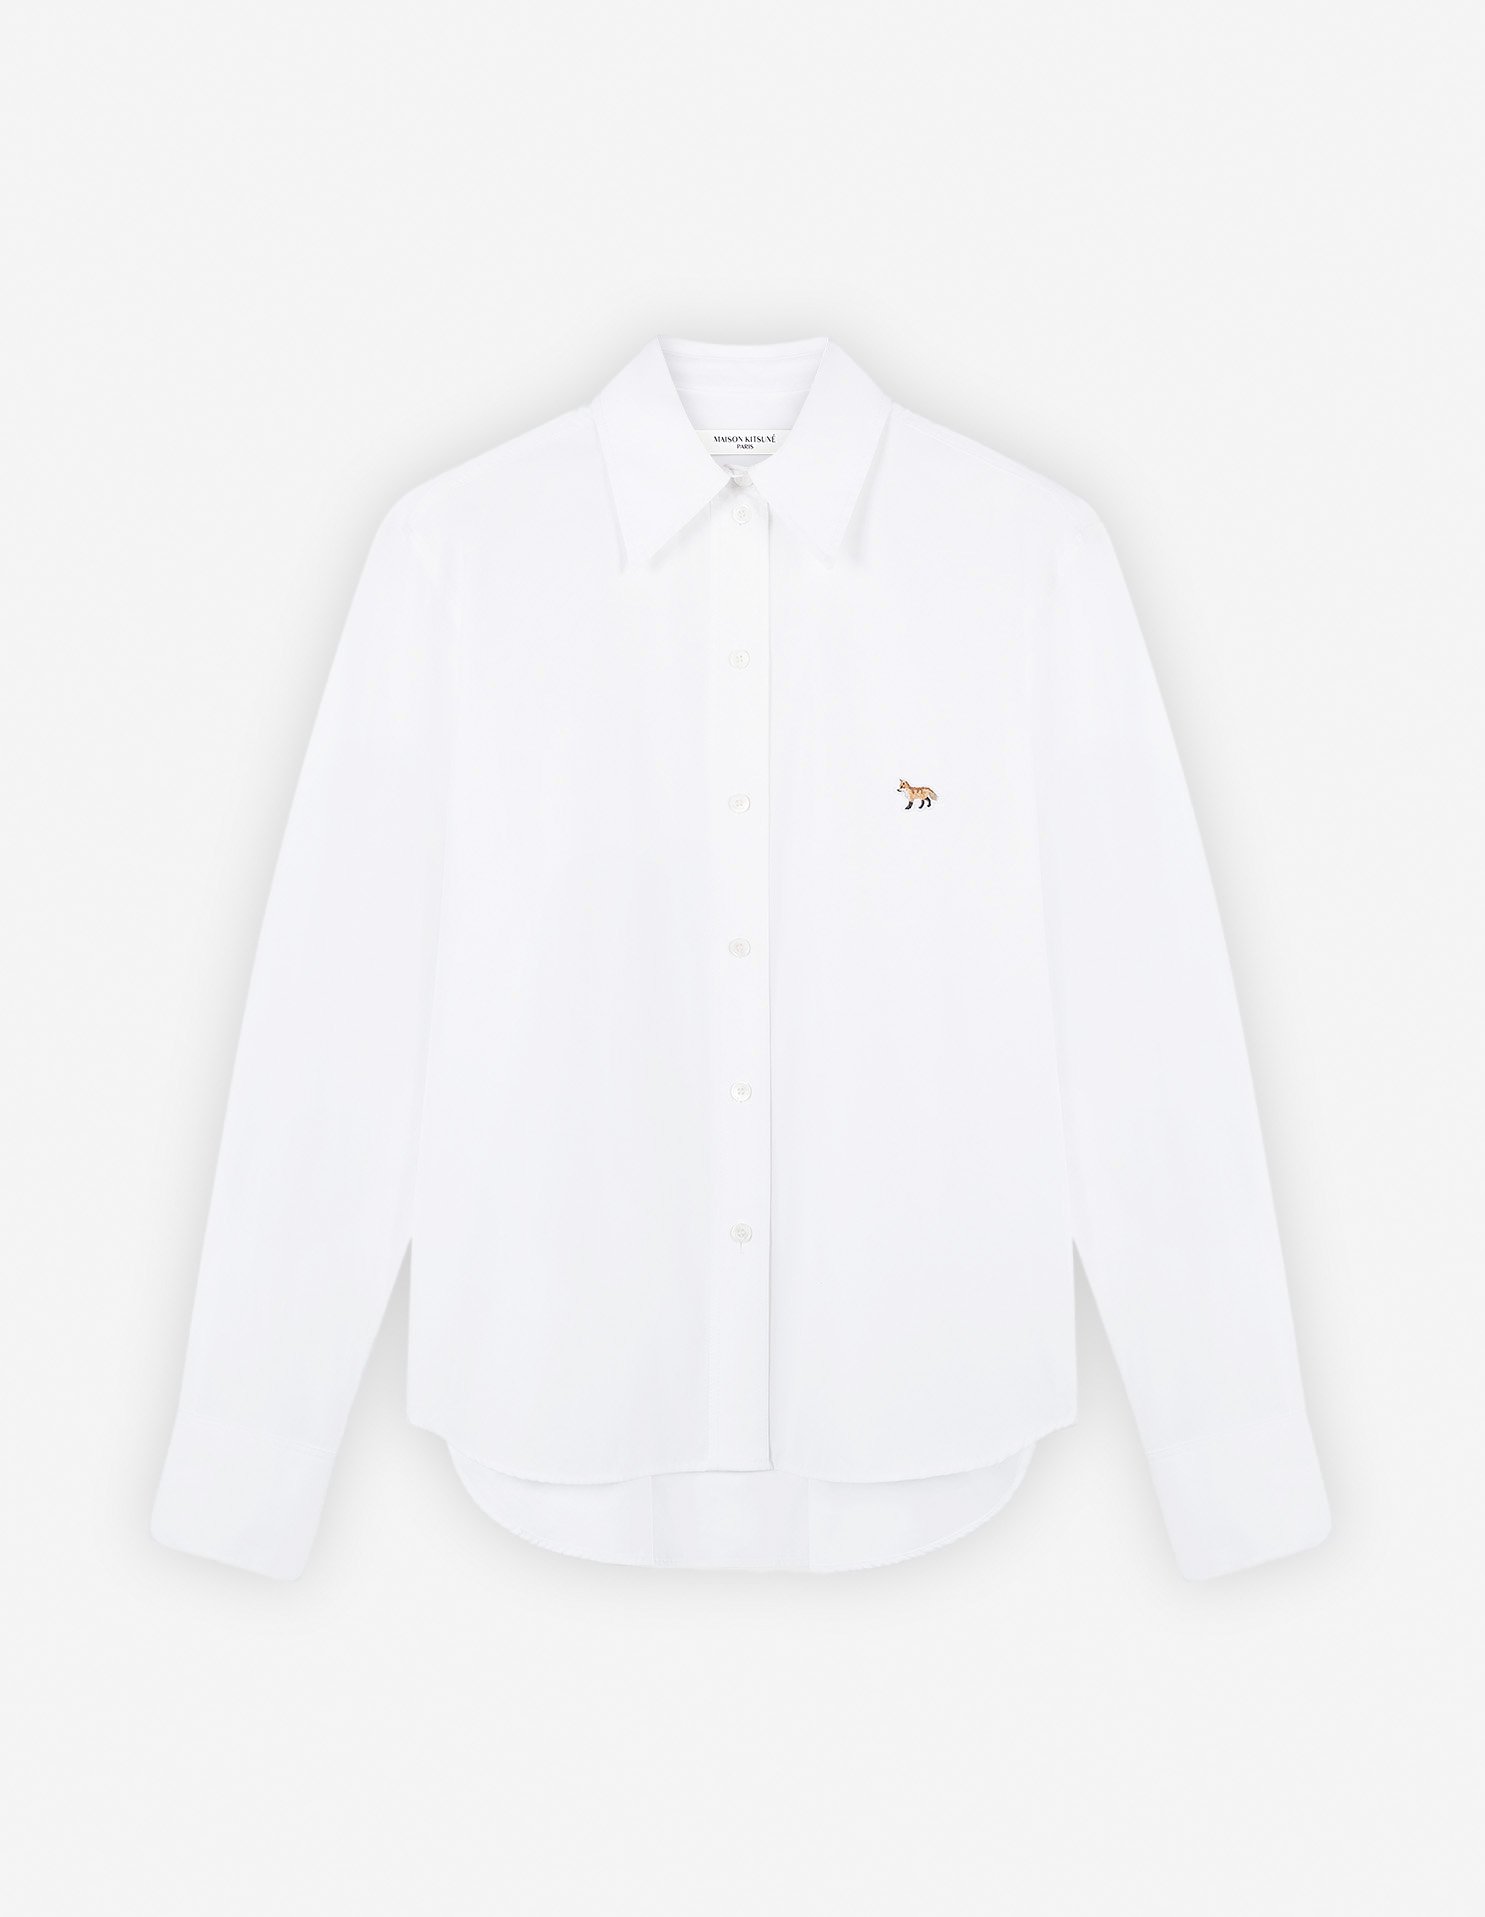 CLASSIC SHIRT WITH BABY FOX PATCH IN COTTON POPLIN | Maison